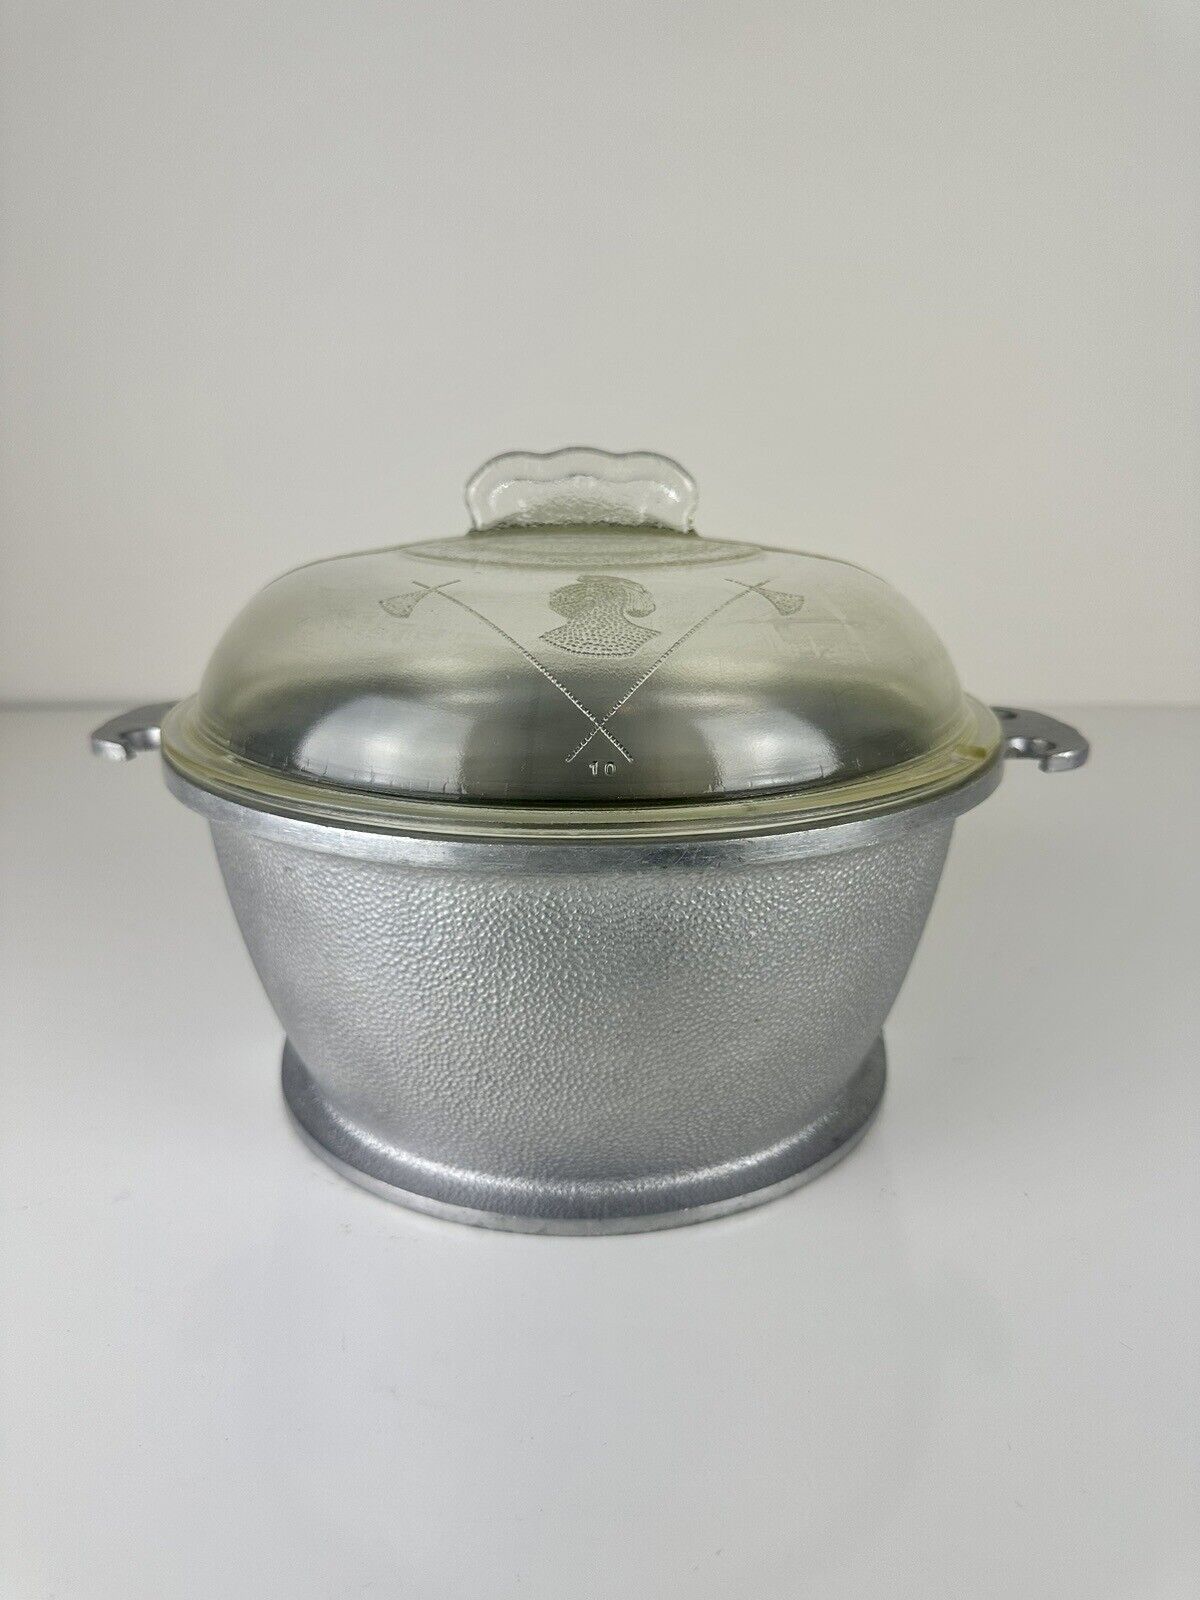 Vintage Guardian Service Ware Aluminum 1 Quart Glass Covered Dome Cooker